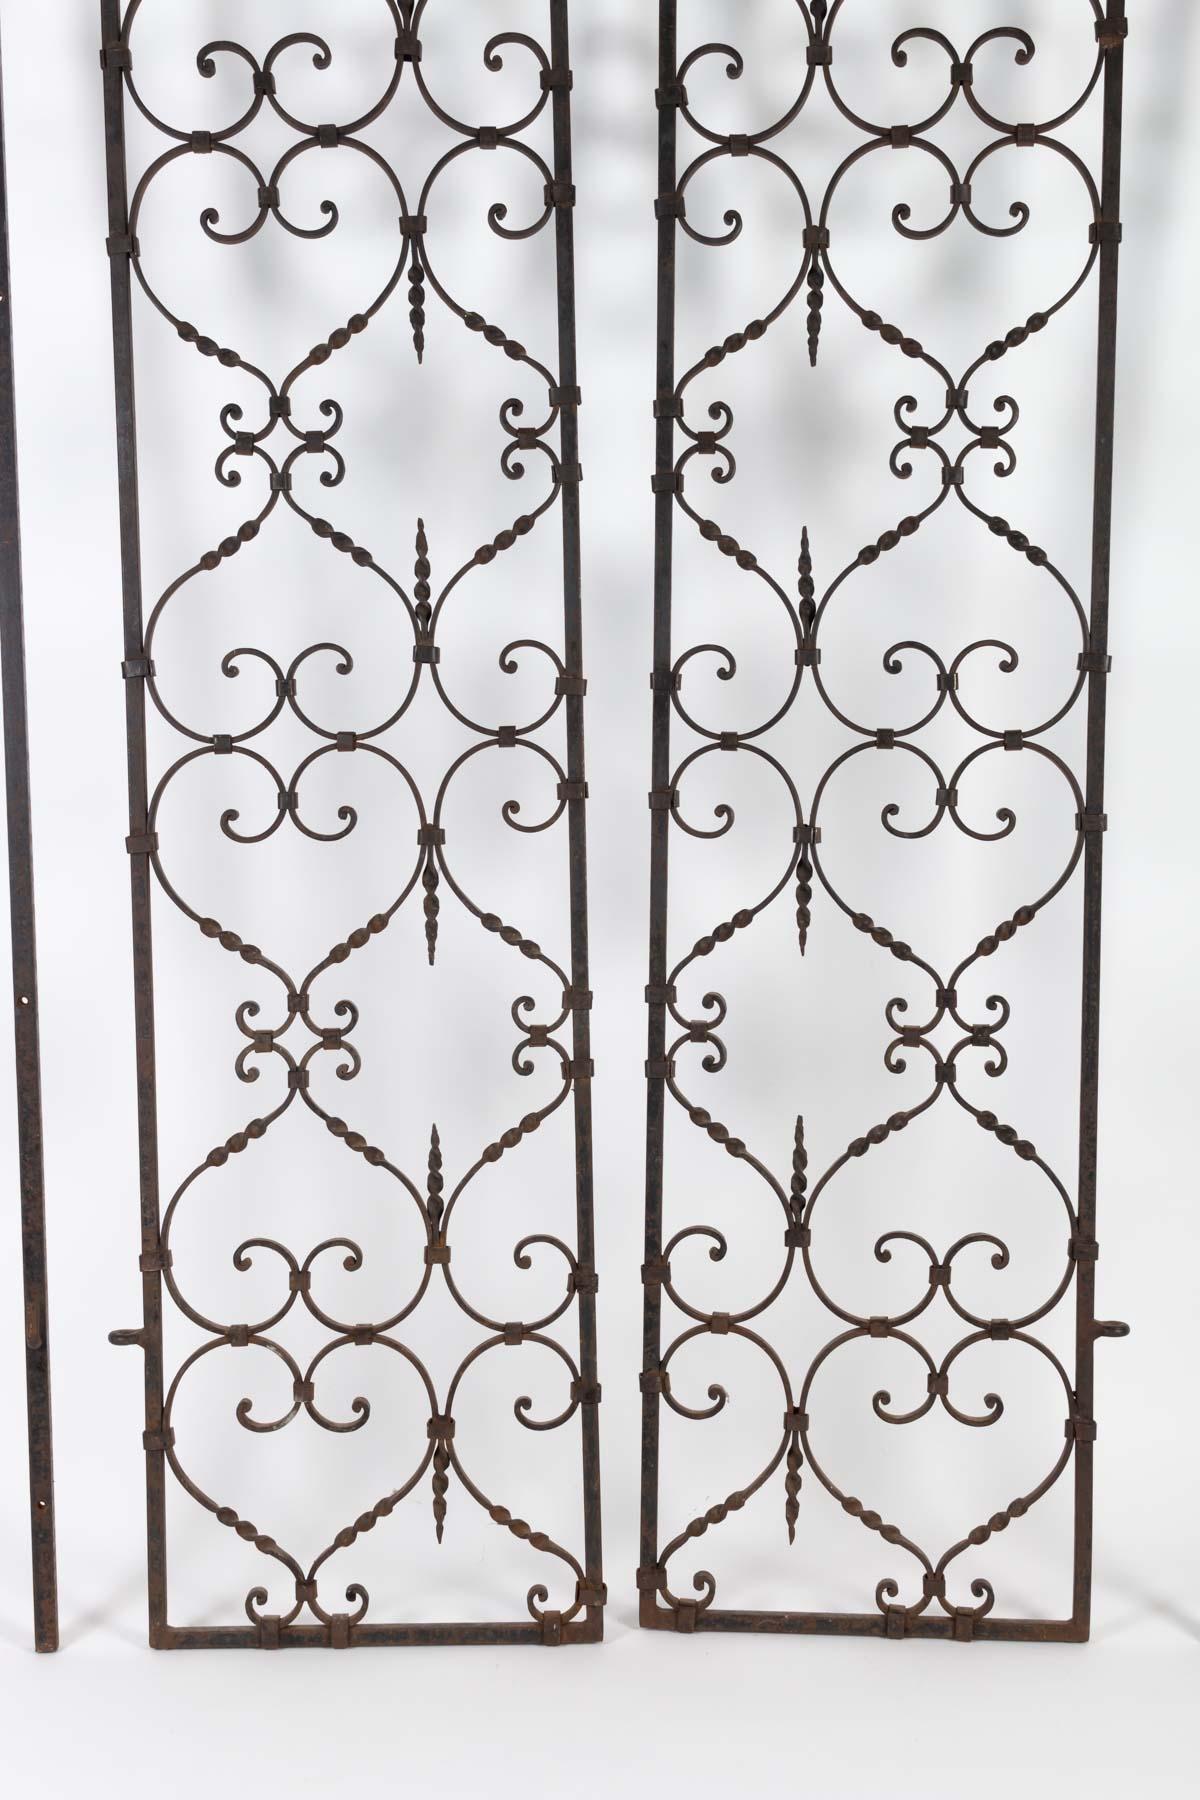 Complete wrought iron interior grilles, 20th century
Measures: H 180, W 90 cm.